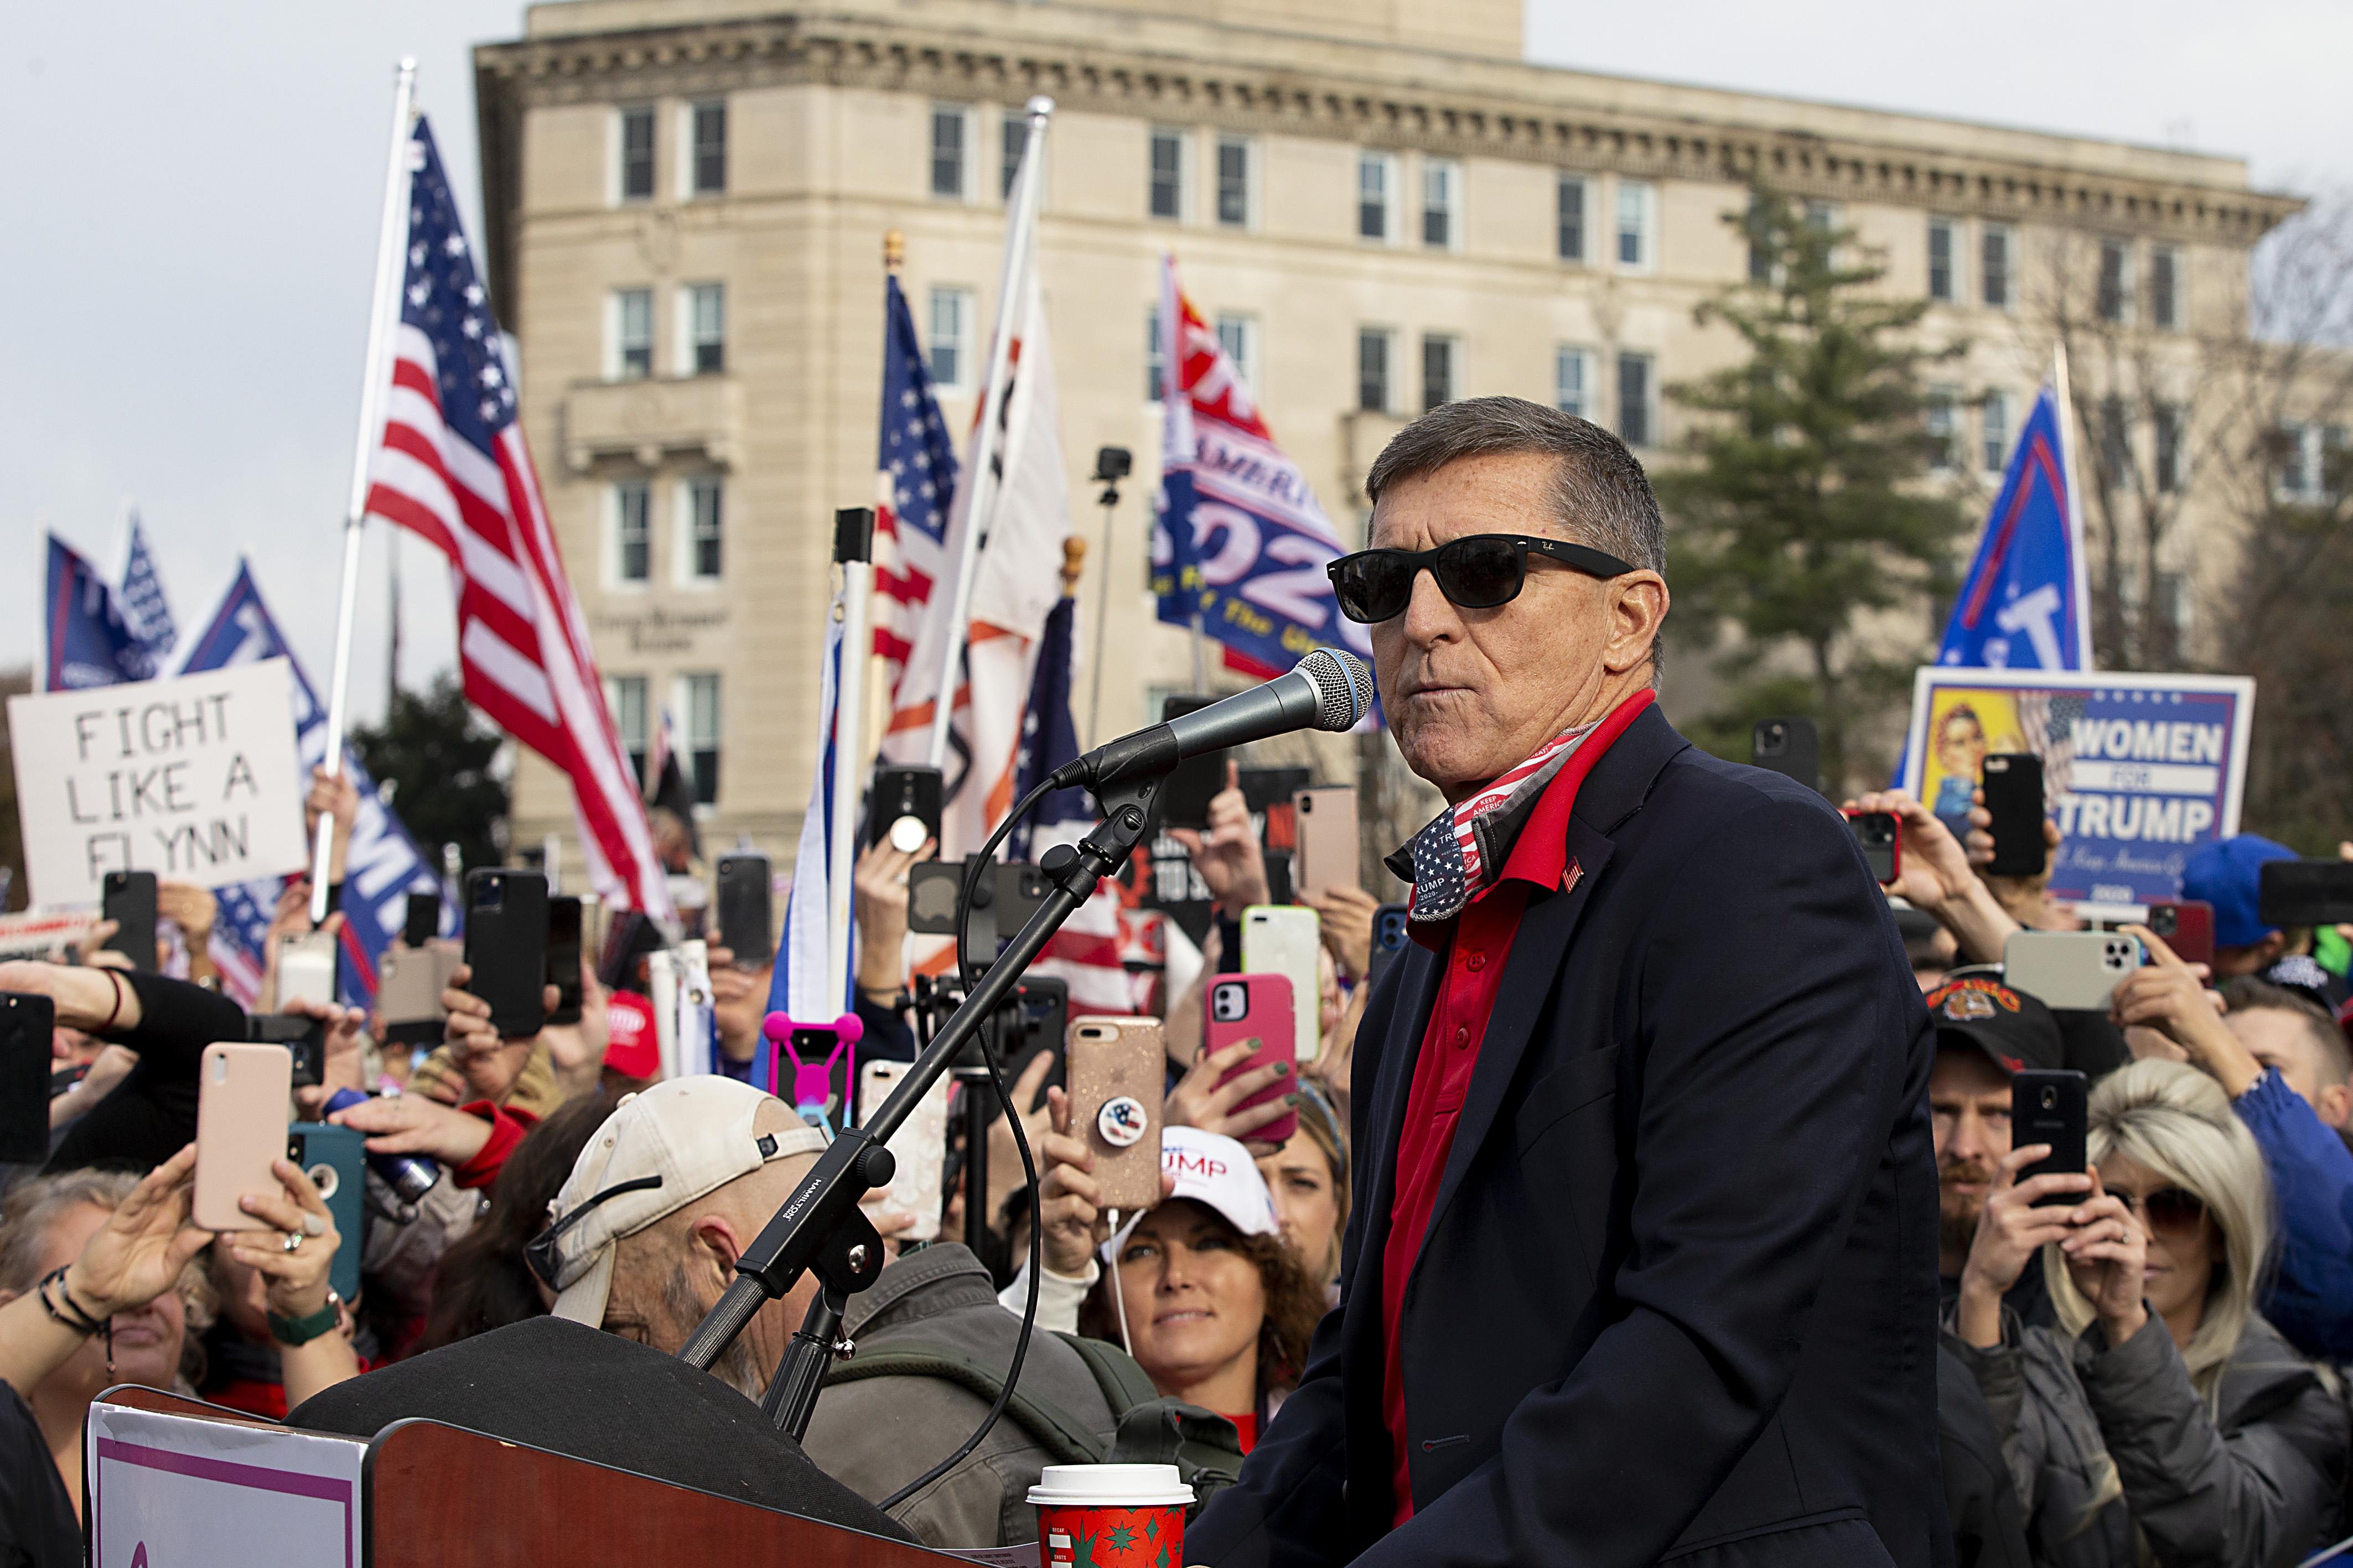 Michael Flynn speaks during a protest of the outcome of the 2020 presidential election outside the Supreme Court on December 12, 2020 in Washington, D.C.